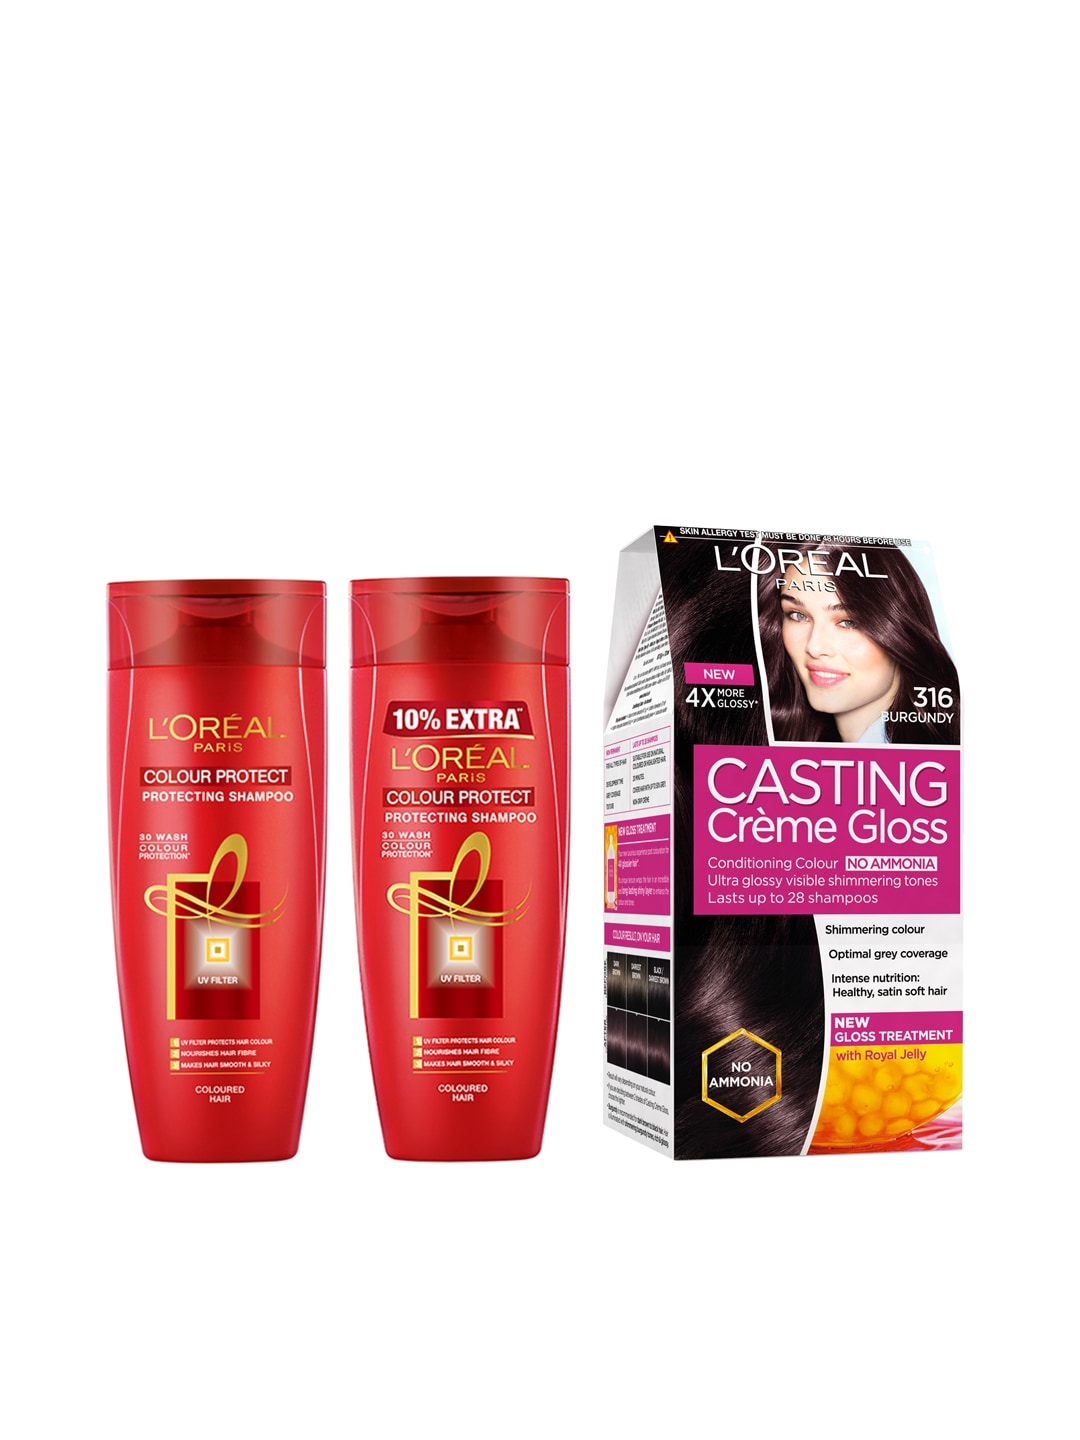 LOreal Paris Women Set Of 2 Colour Protect Shampoo & Burgundy 316 Creme Gloss Hair Color Price in India